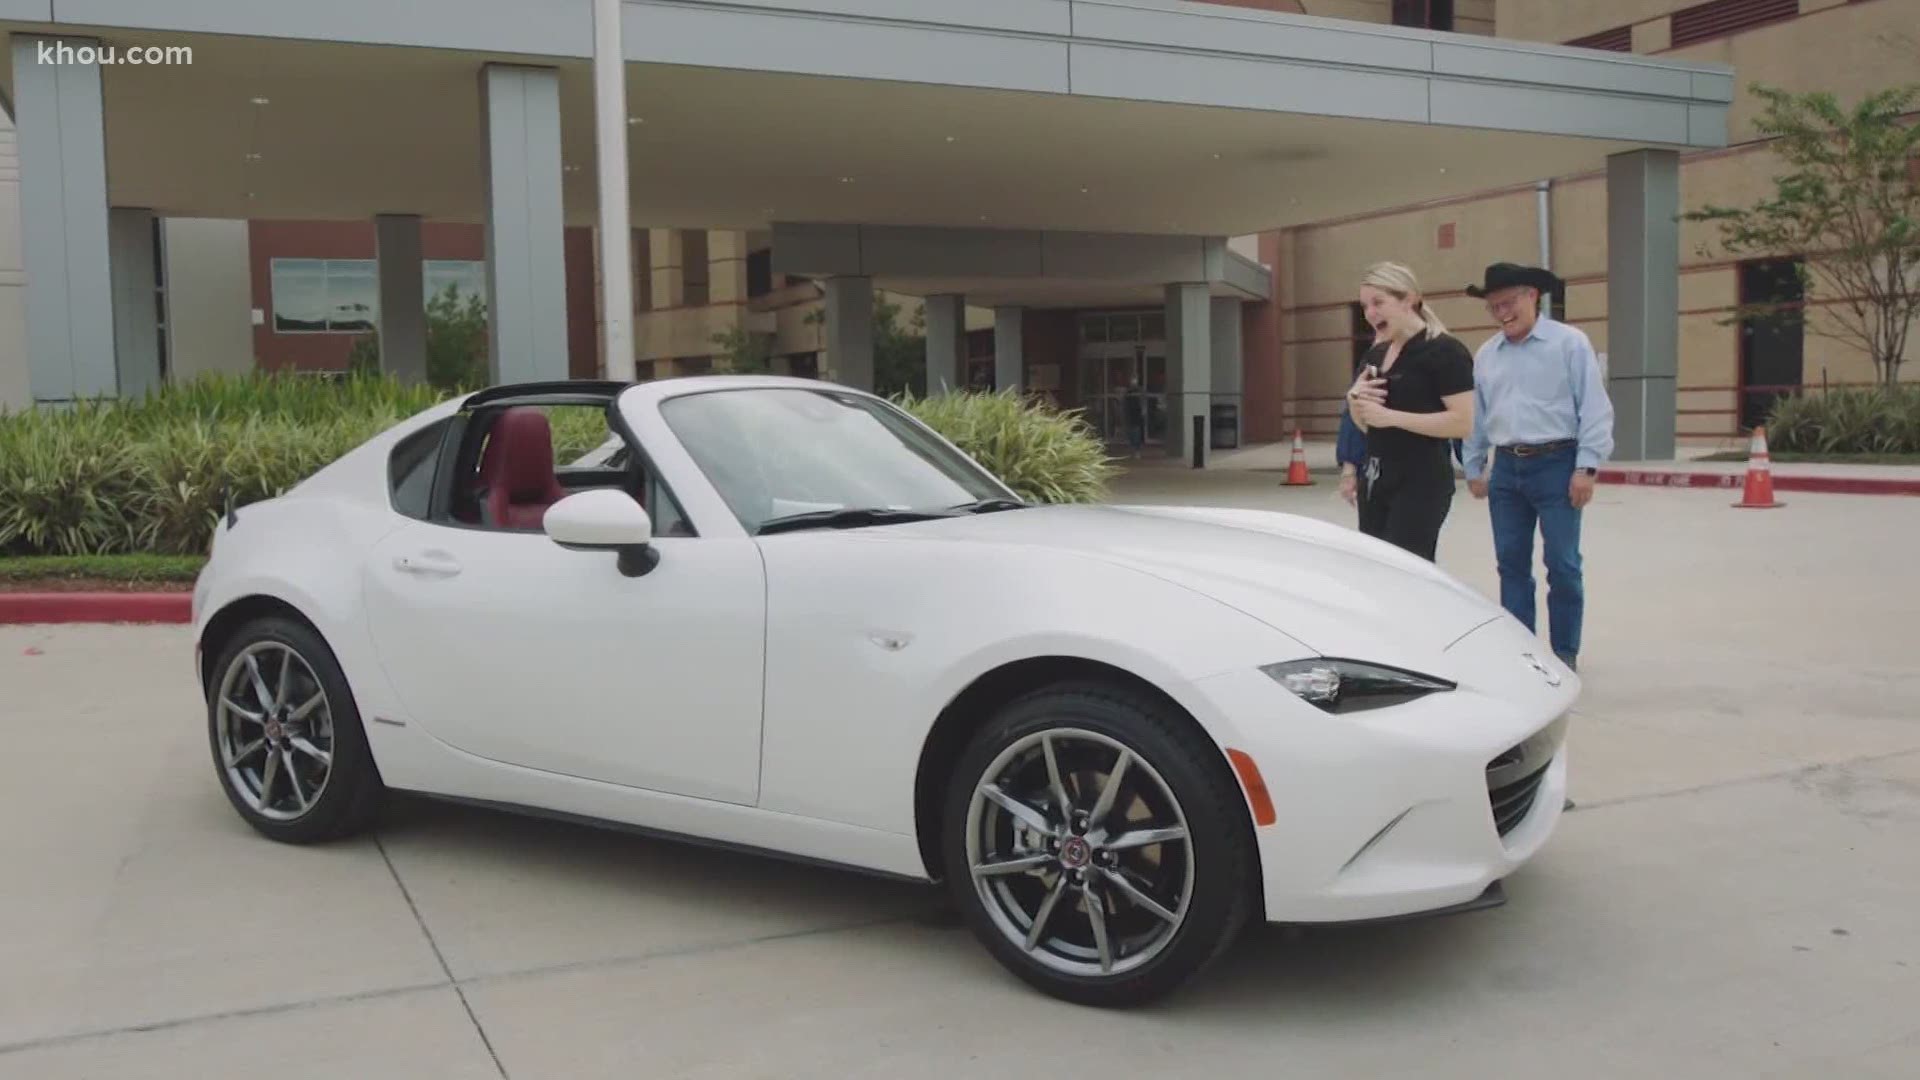 An ICU nurse at Memorial Hermann was awarded a new Mazda car for going above and beyond during the COVID-19 pandemic.